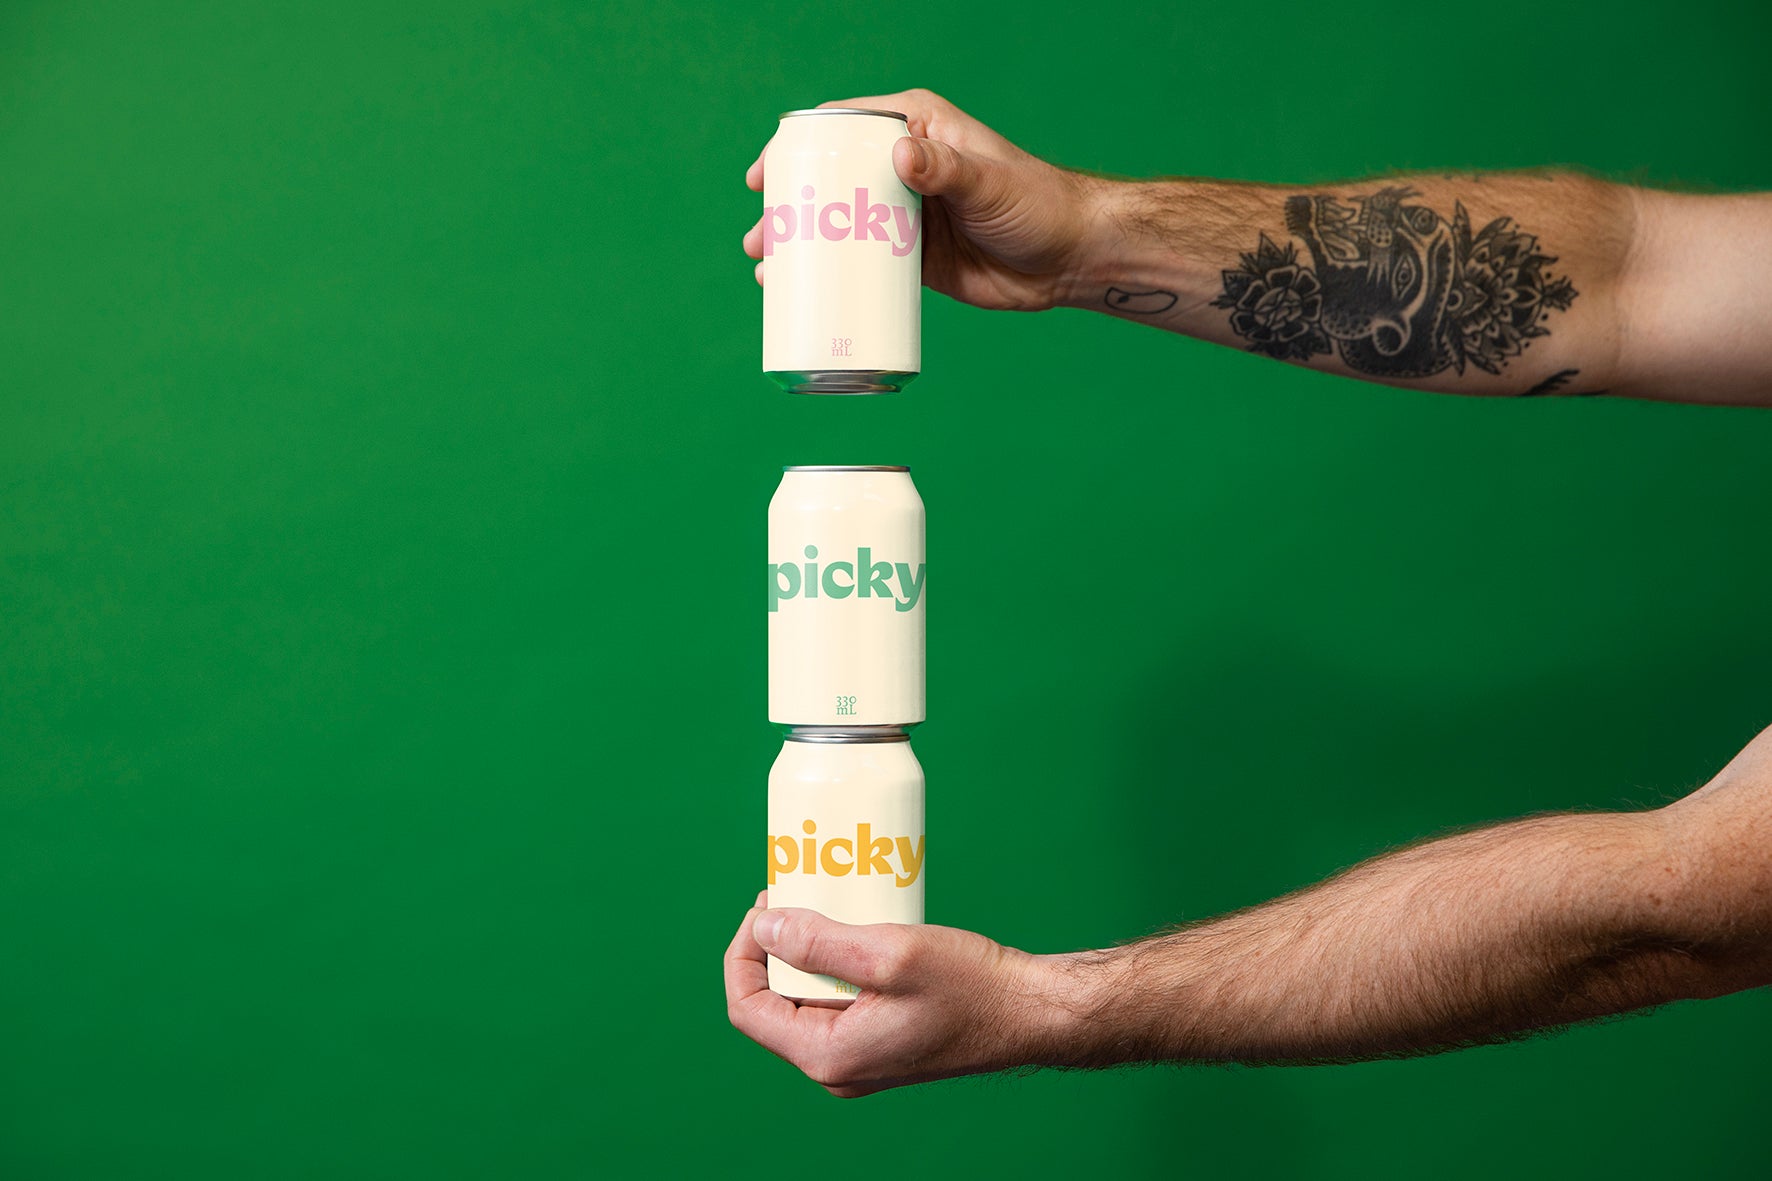 Tattooed arms hold out three cans stacked. Against a green studio backdrop.